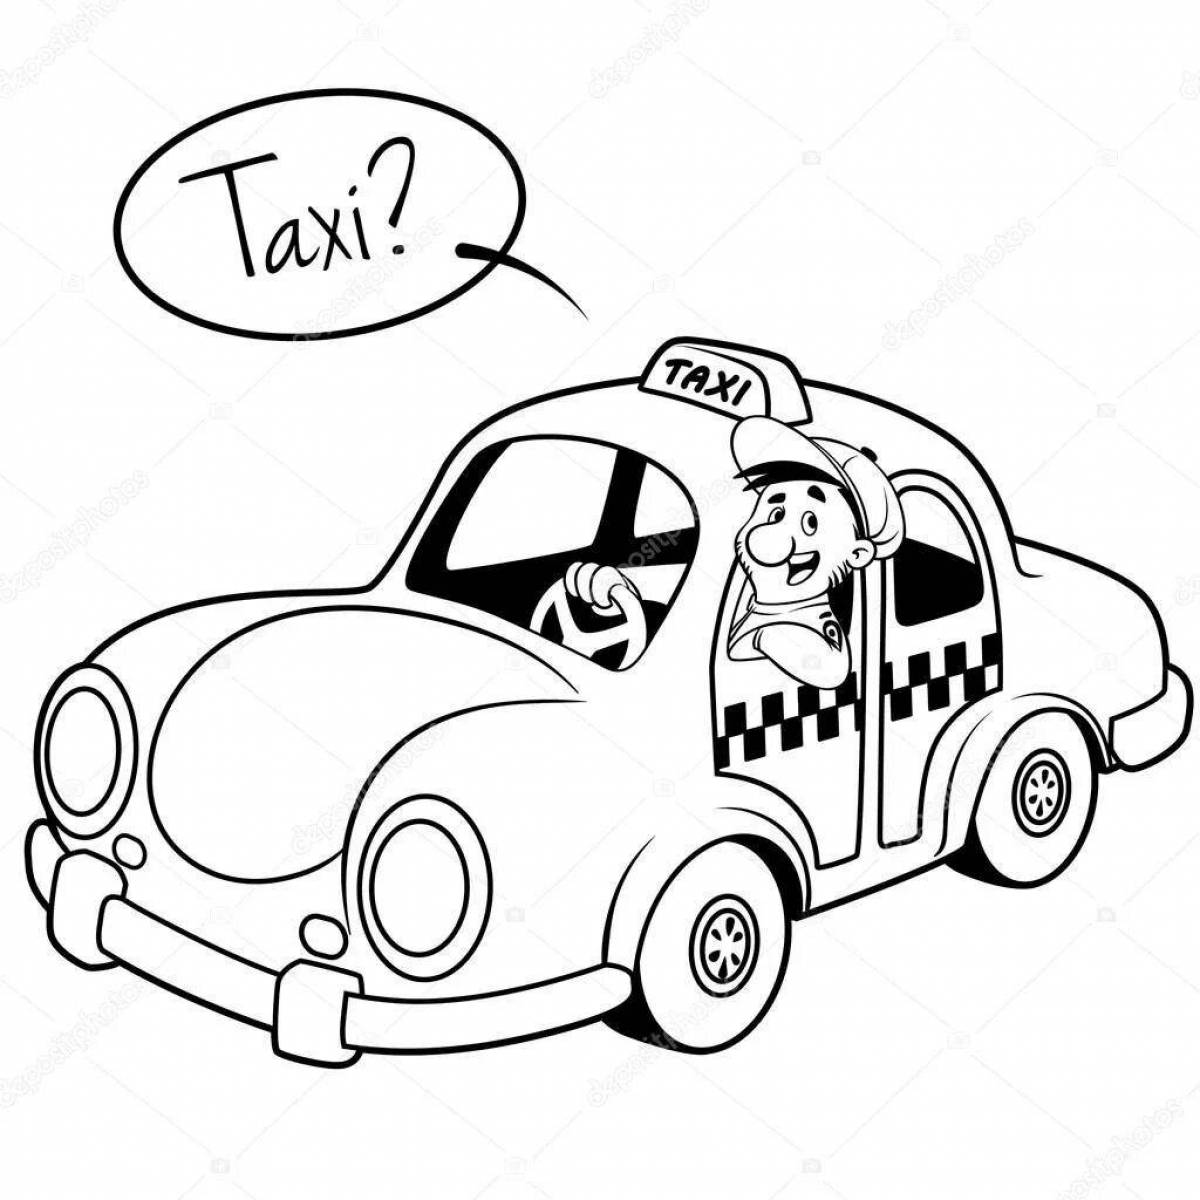 Splendid taxi coloring book for kids 3-4 years old